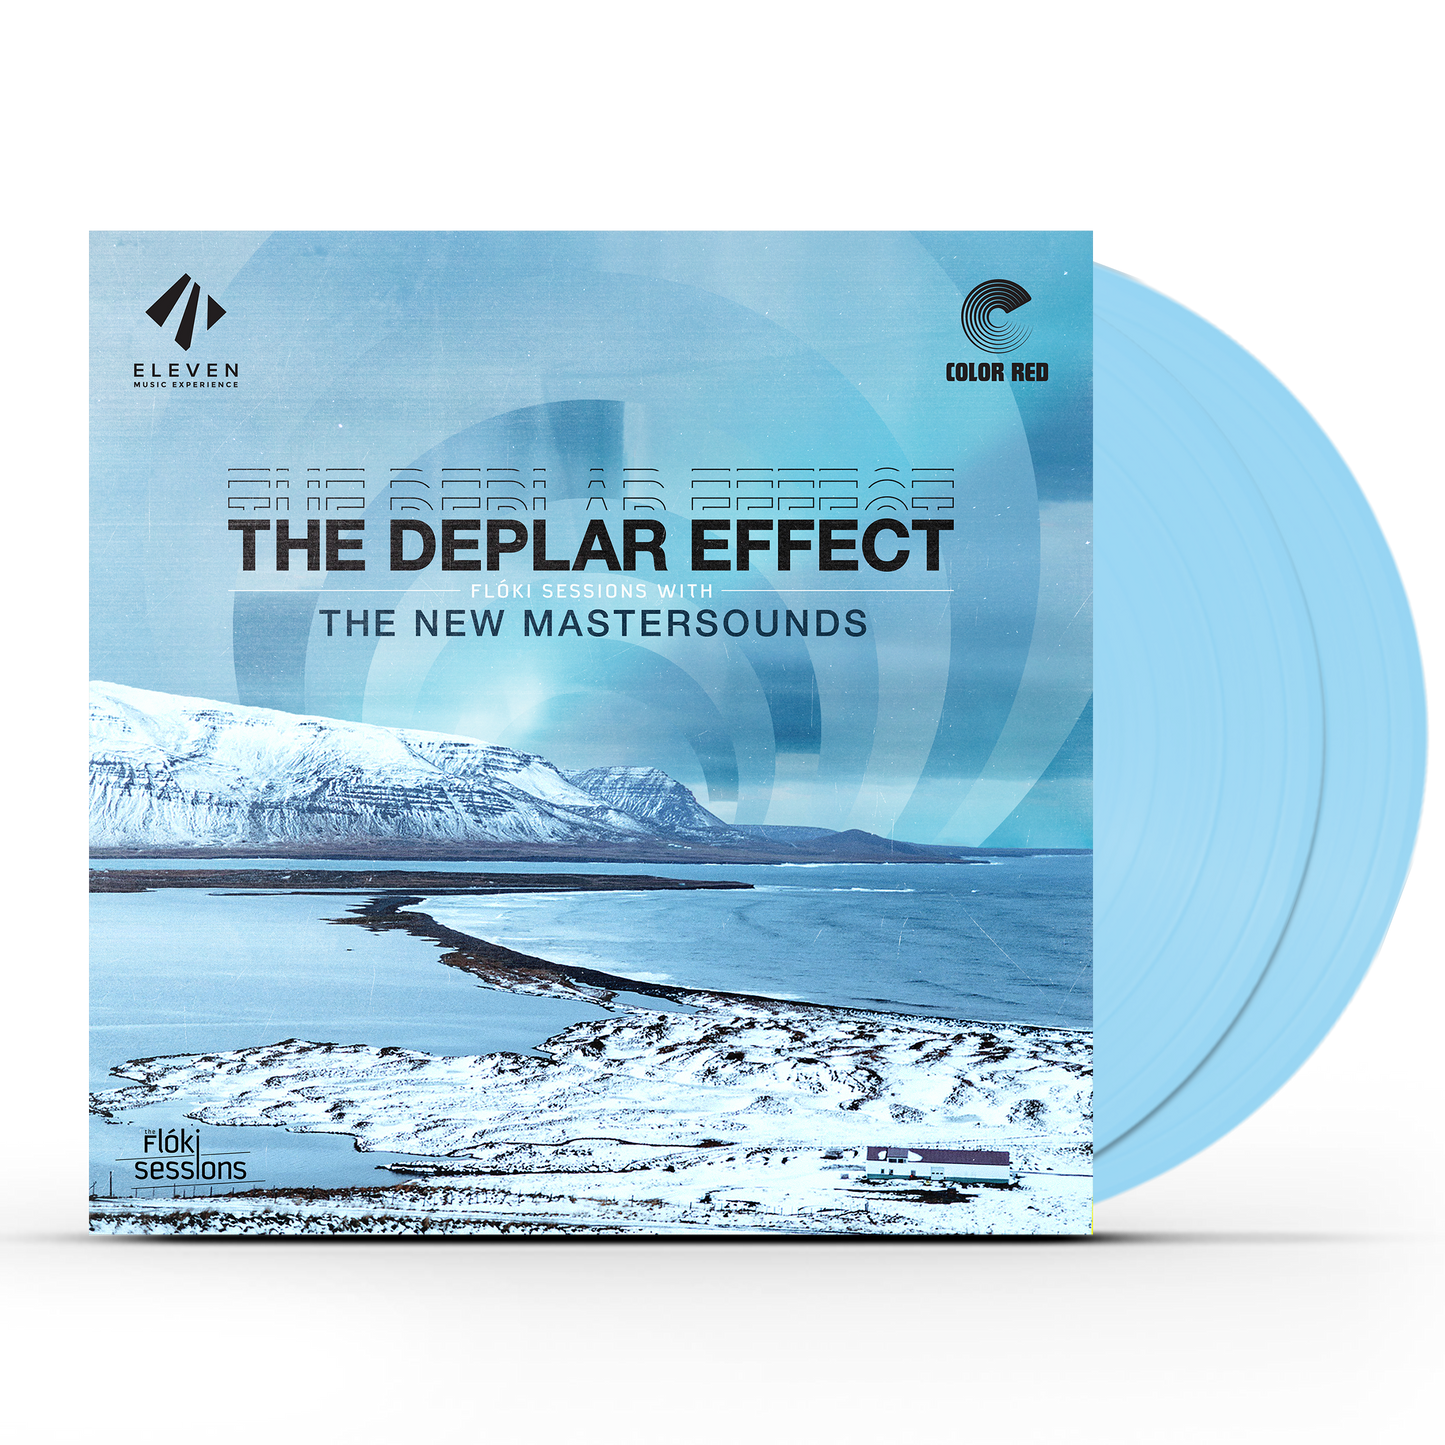 The New Mastersounds - The Deplar Effect (2LP)